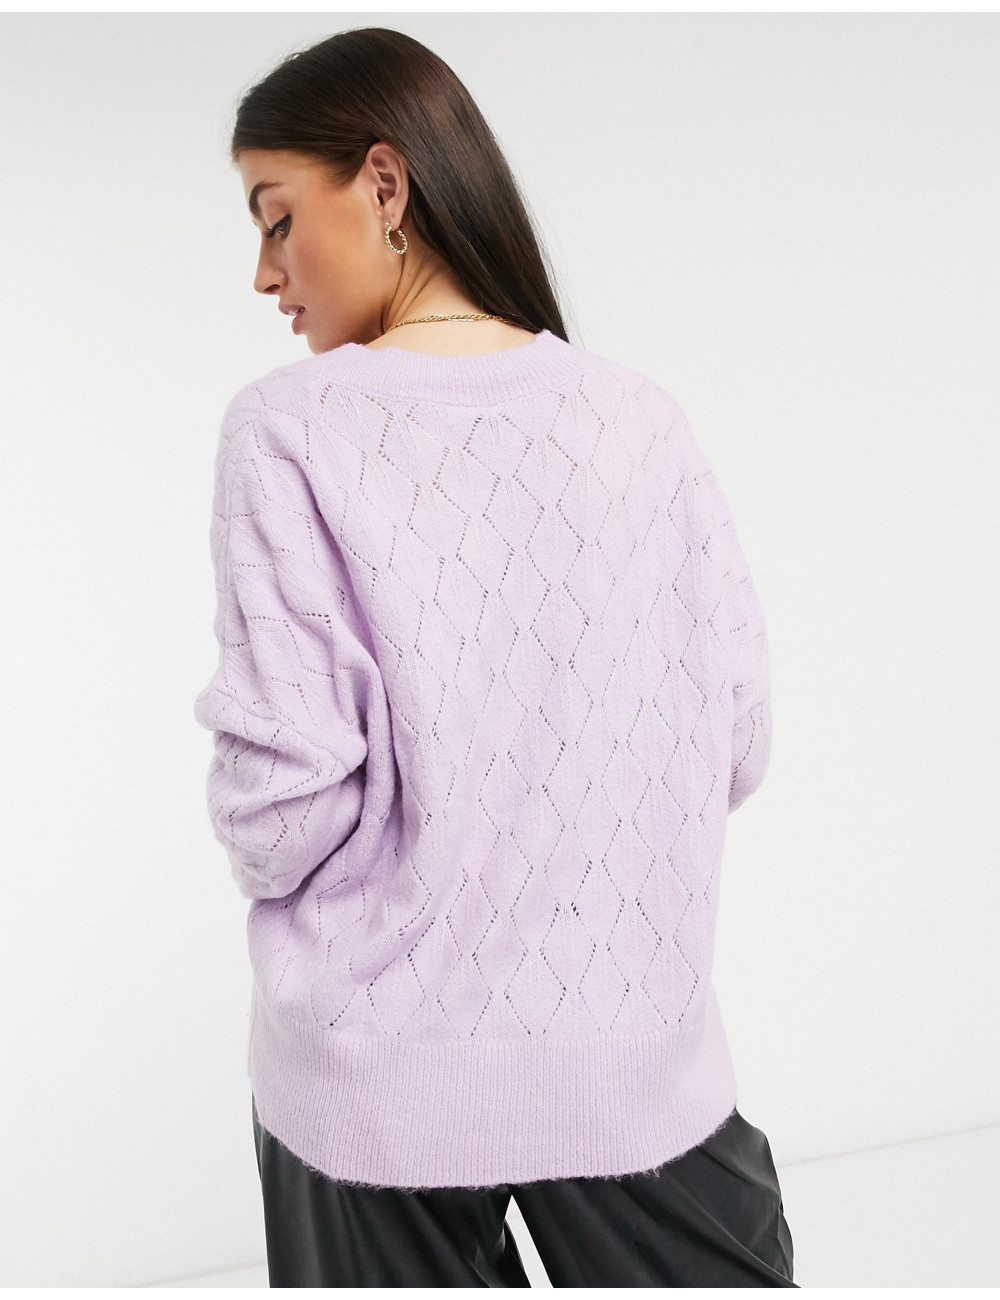 Y.A.S. Duffy textured knit...